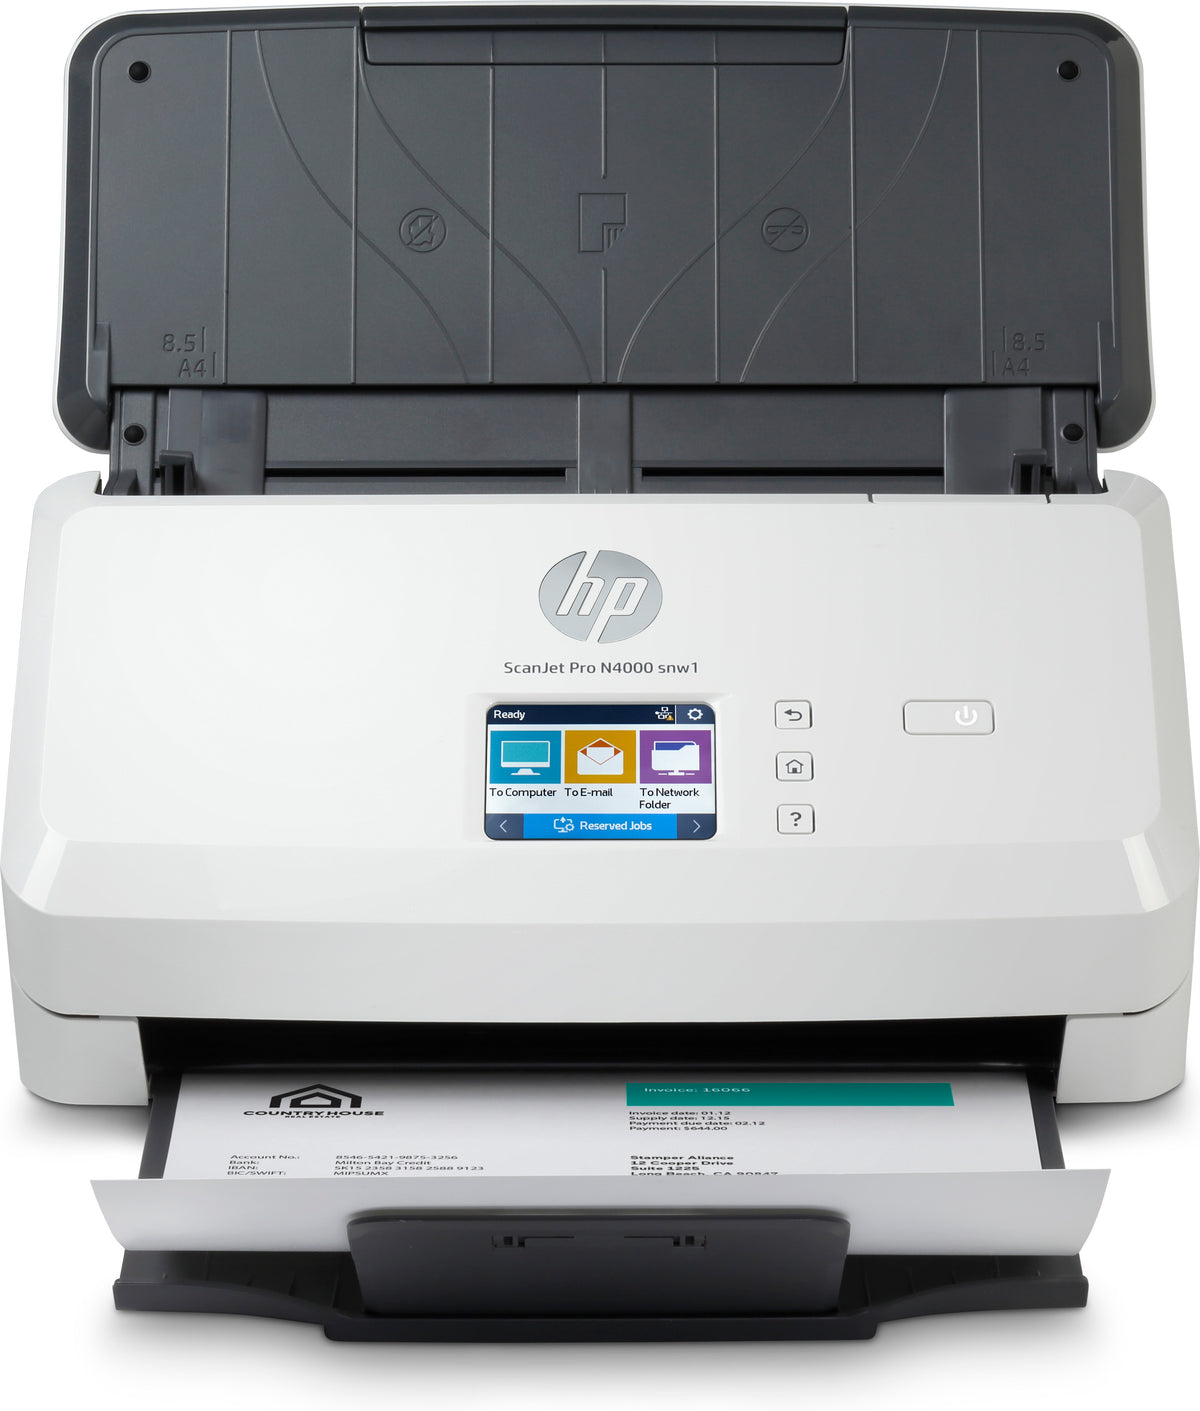 HP Scanjet Pro N4000 snw1 Sheet-feed - Document Scanner - CMOS/CIS - Duplex - 216 x 3100 mm - 600 dpi x 600 dpi - up to 40 ppm (mono) - ADF (50 sheets) - up to 4000 scans per day - USB 3.0, LAN, WiFi(n)